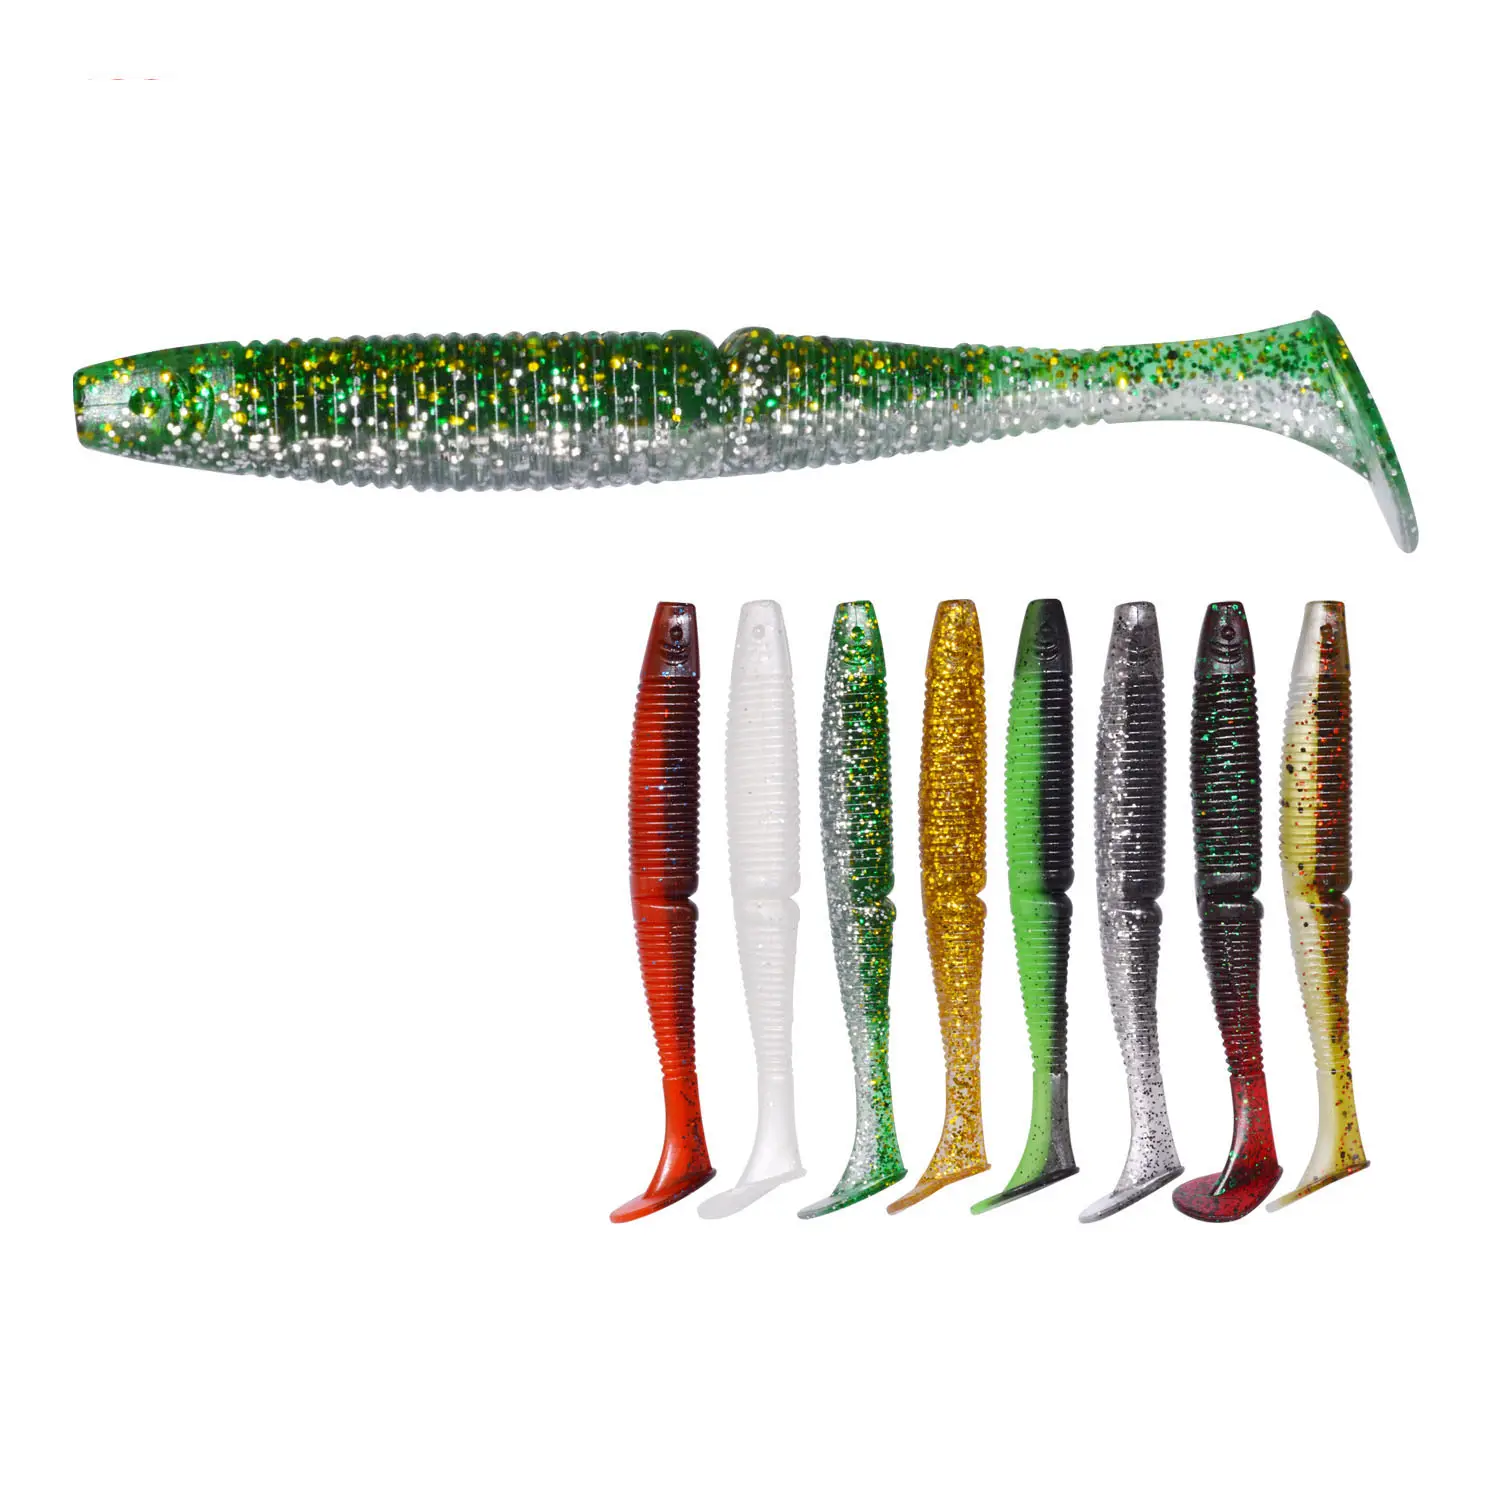 Plastic soft fishing worm 12cm 11g 3pcs Soft Fish Lure with paddle tail silicon fishing bait bass lure shad lures